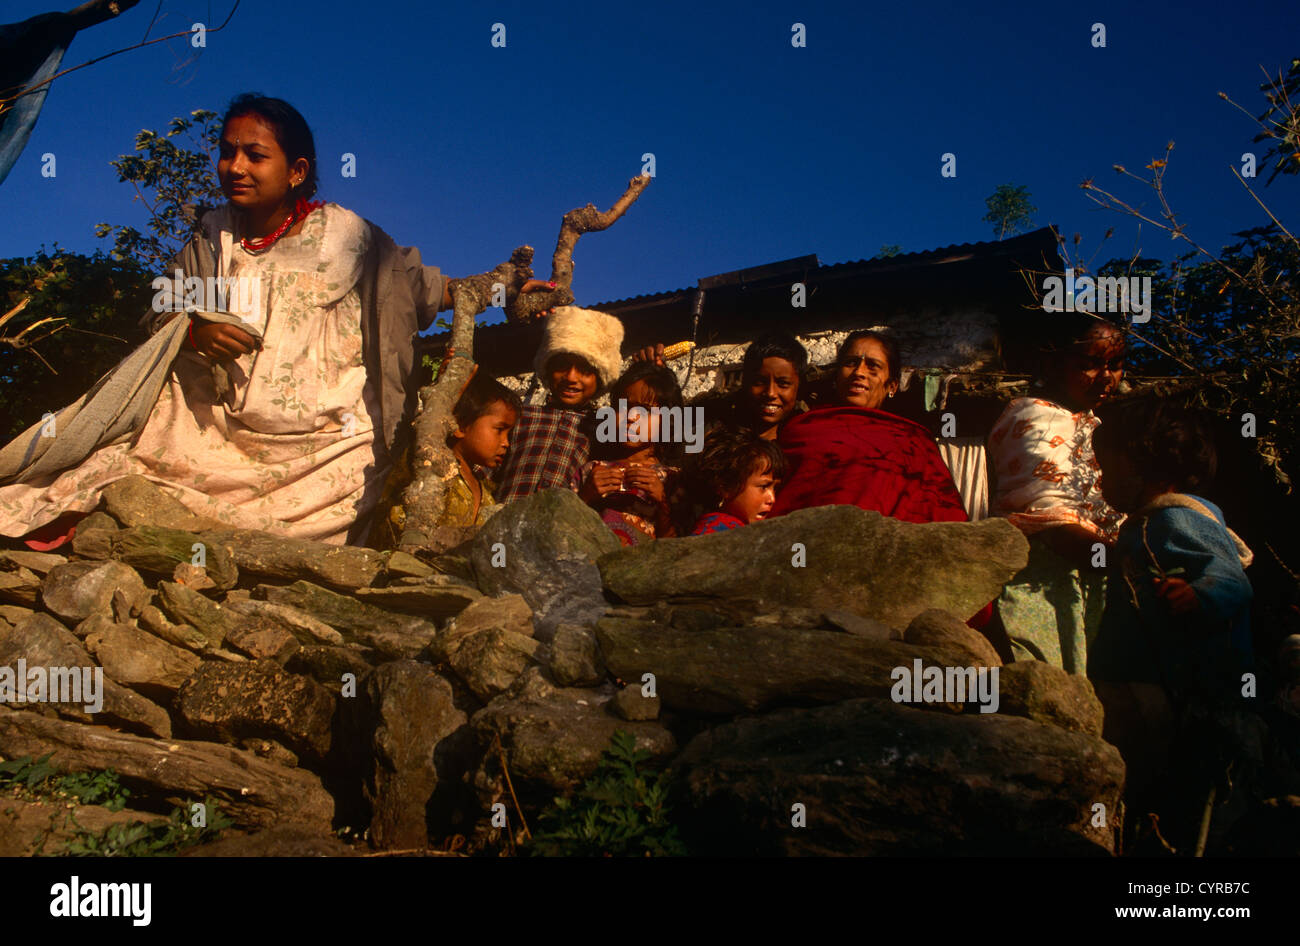 A Nepali family consisting of parents and young children outside their home in the central region of Himalayan mountain kingdom. Stock Photo